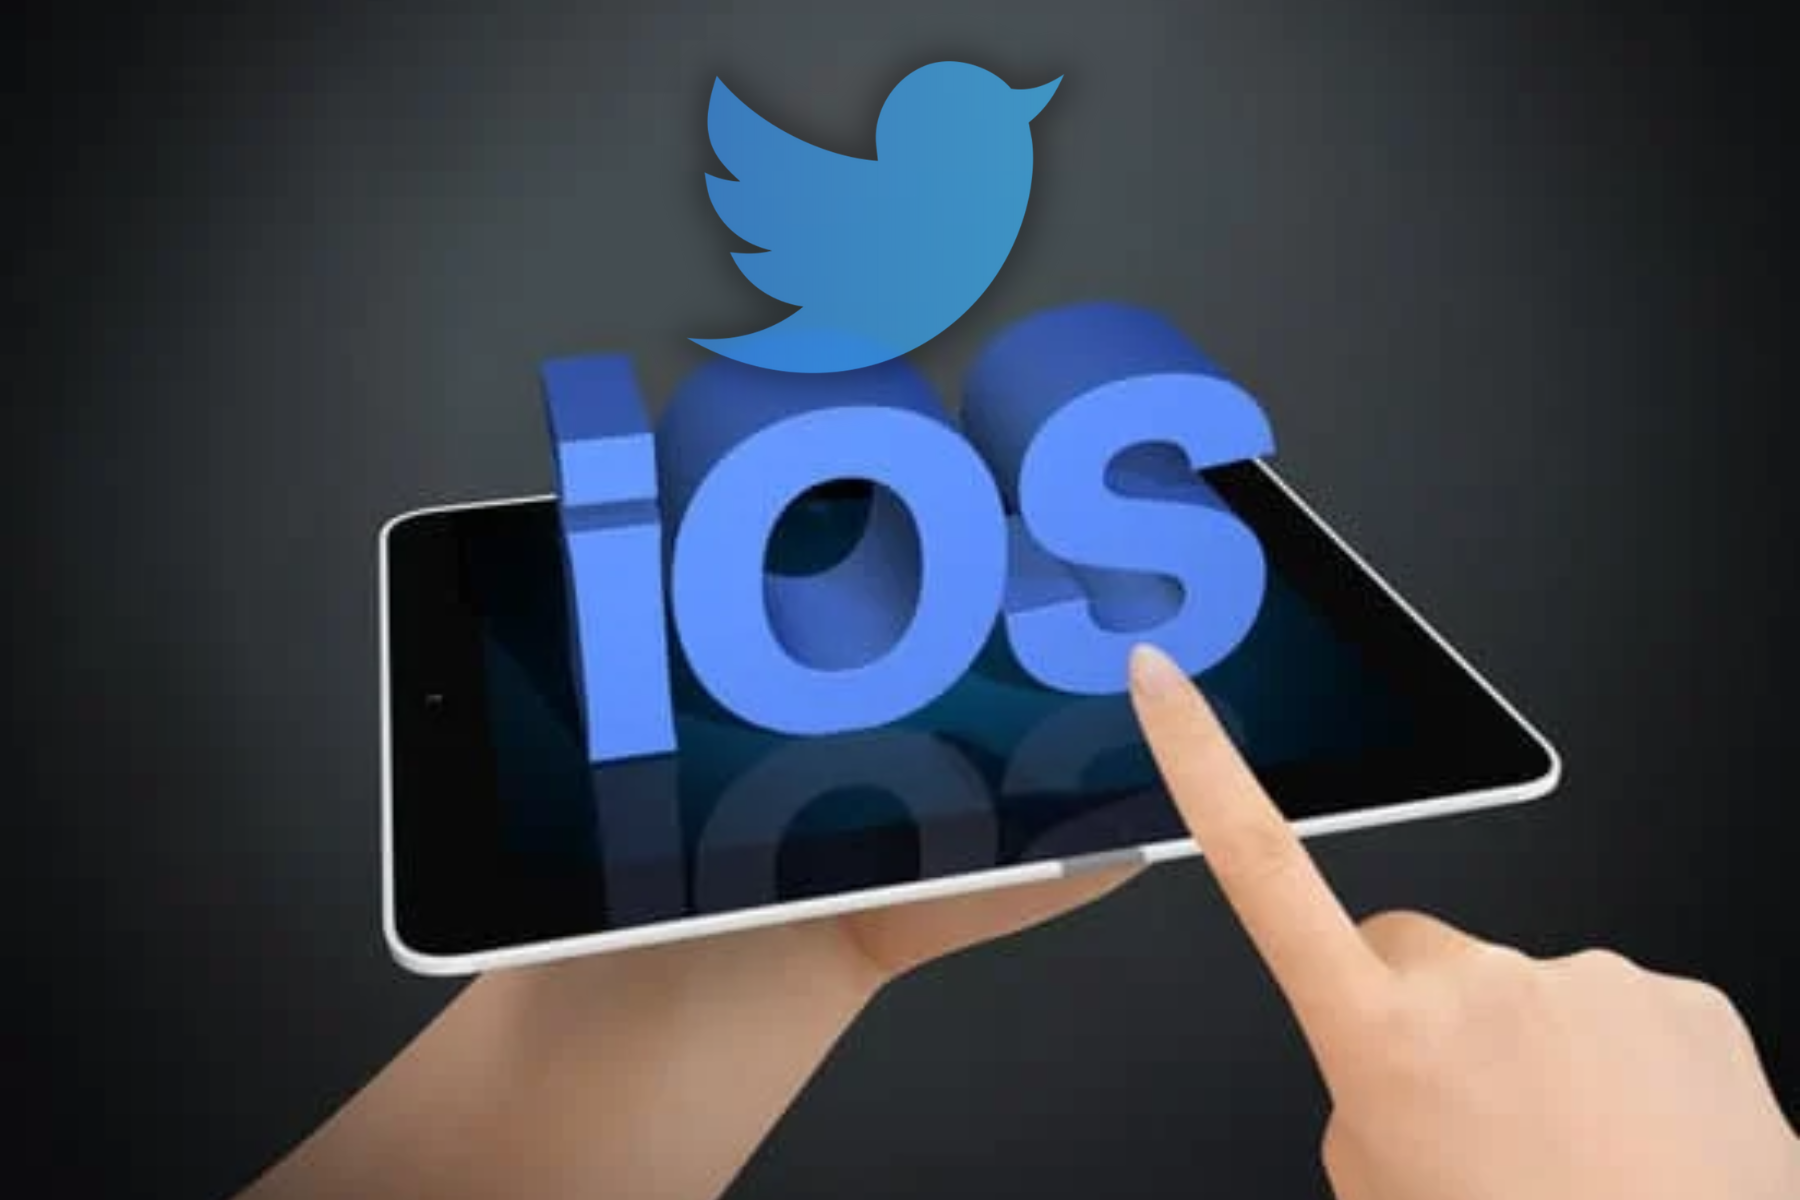 A woman's hand holding an iPad with a 3D "iOS" logo and a Twitter logo on top